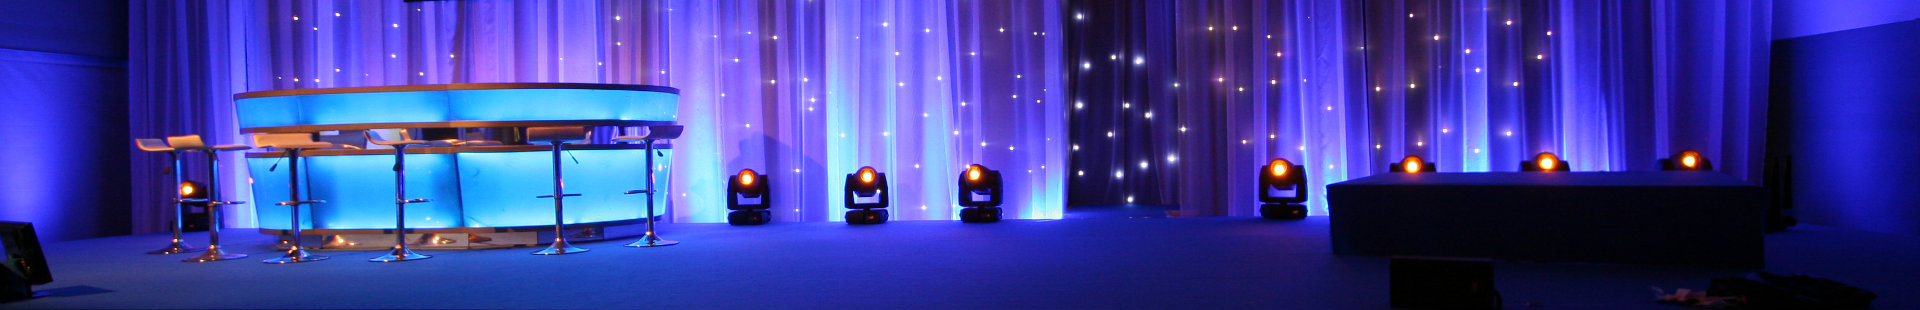 Event lighting hire and lighting systems rental in Vienna and Austria, FX light